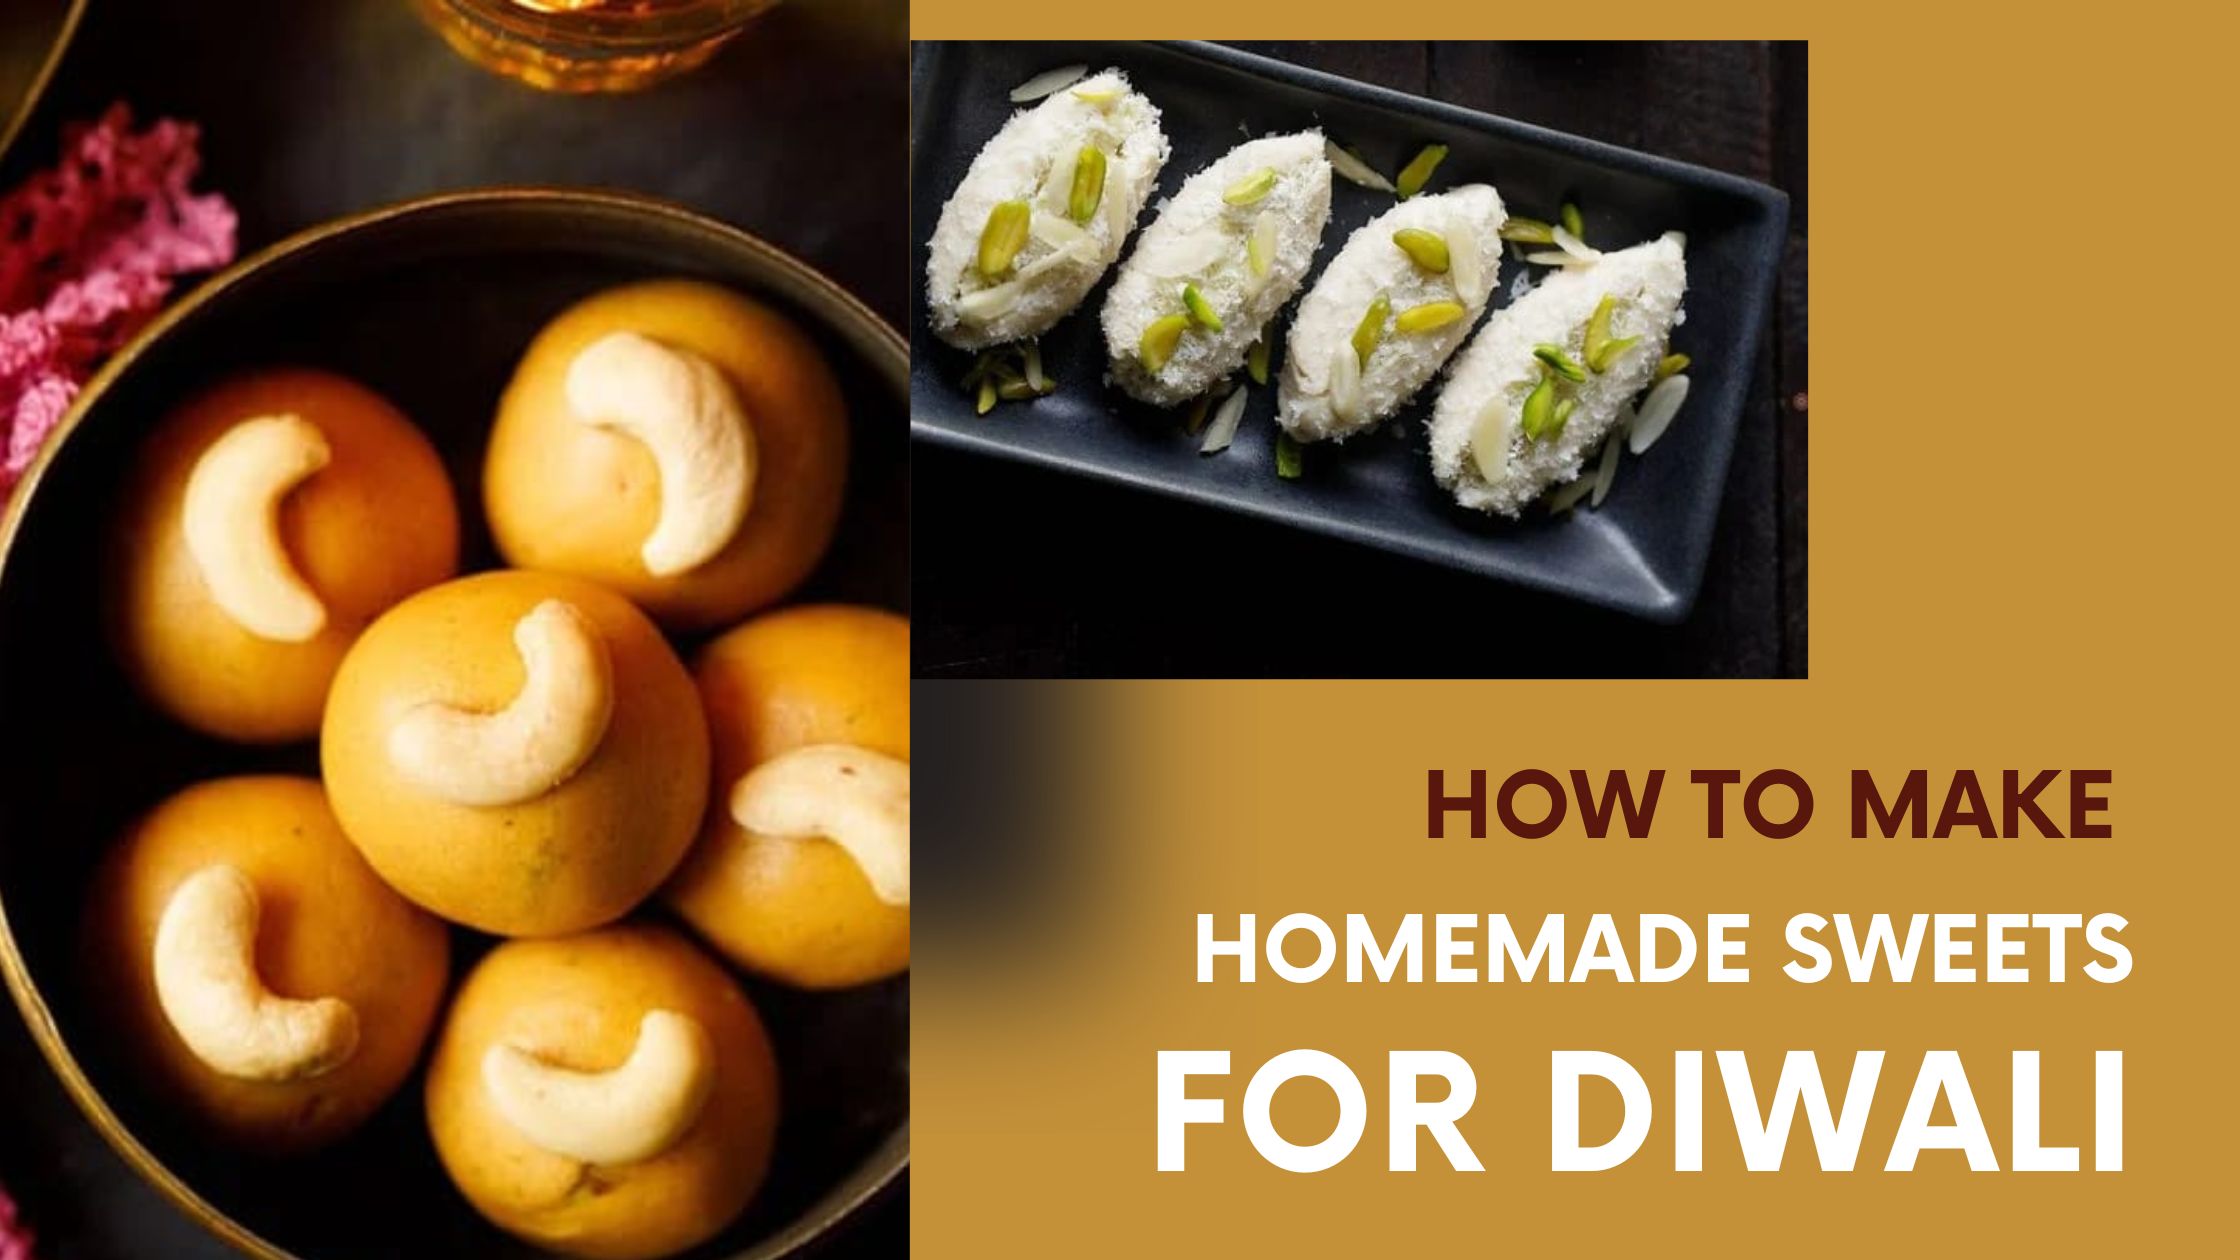 How to Make Homemade Sweets for Diwali